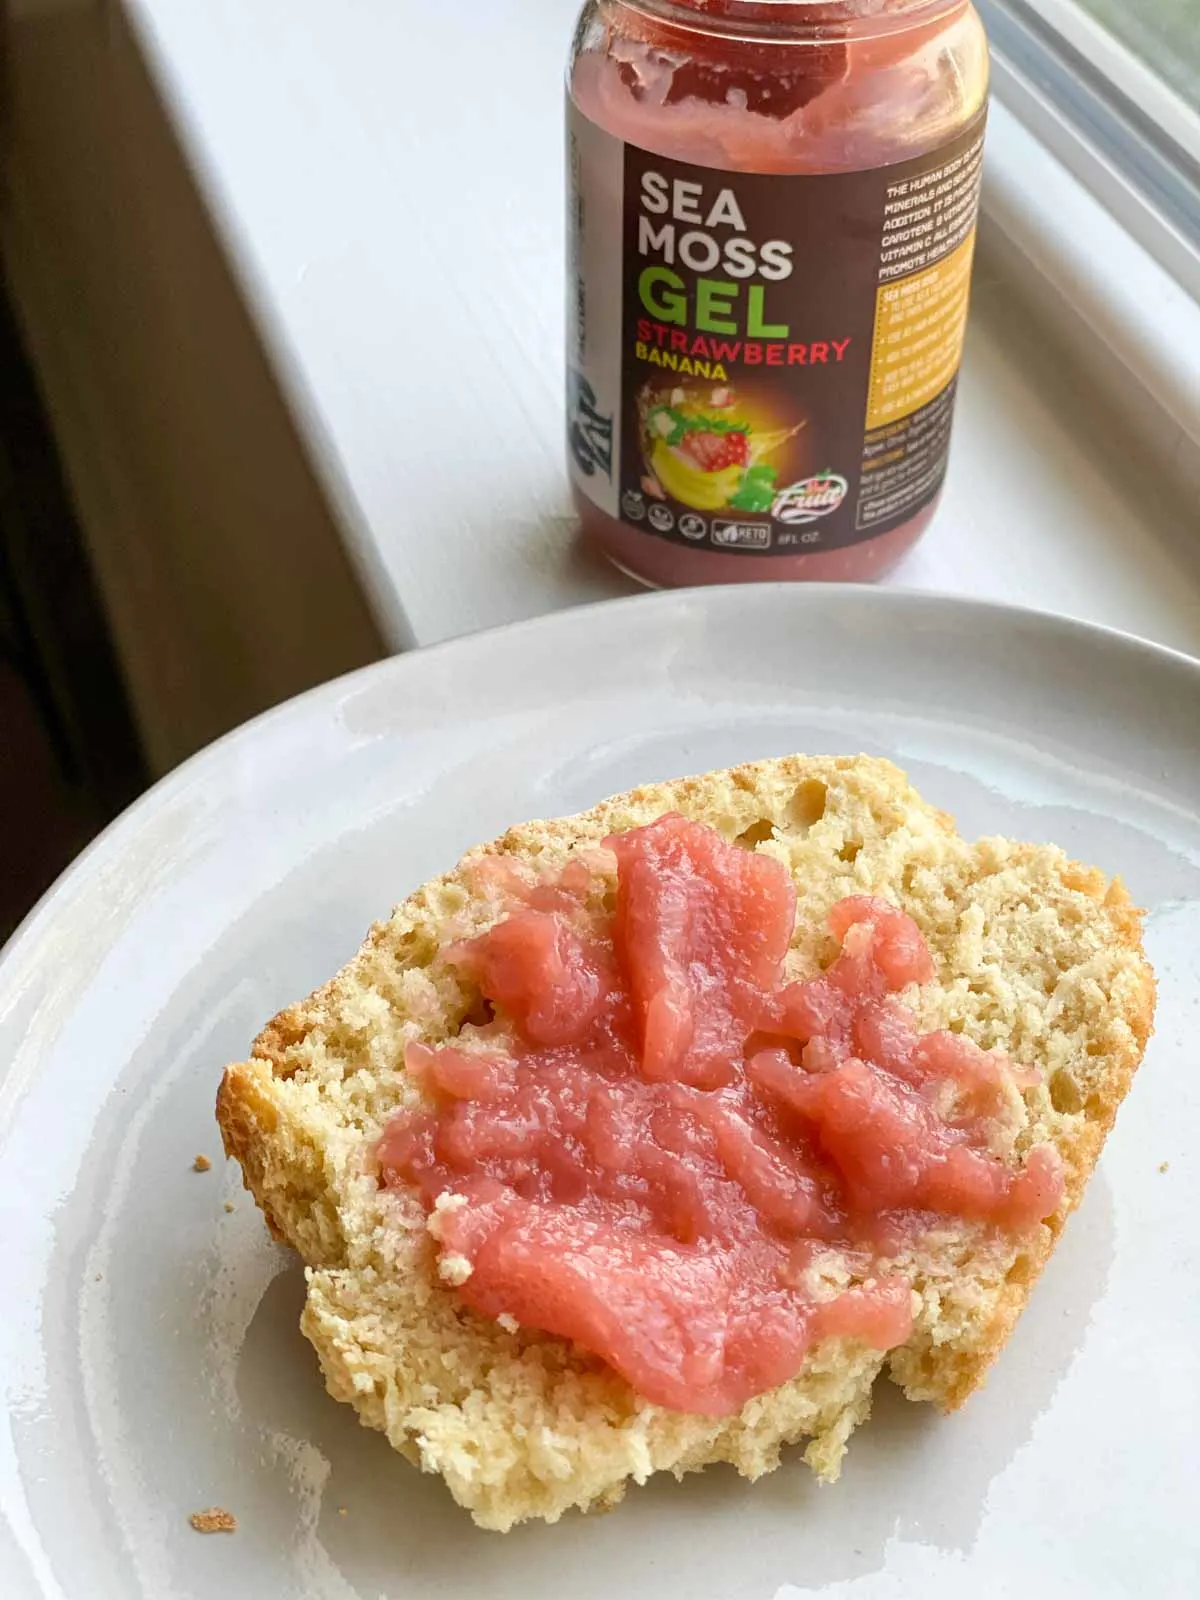 strawberry banana sea moss gel used as jam on piece of bread on white plate